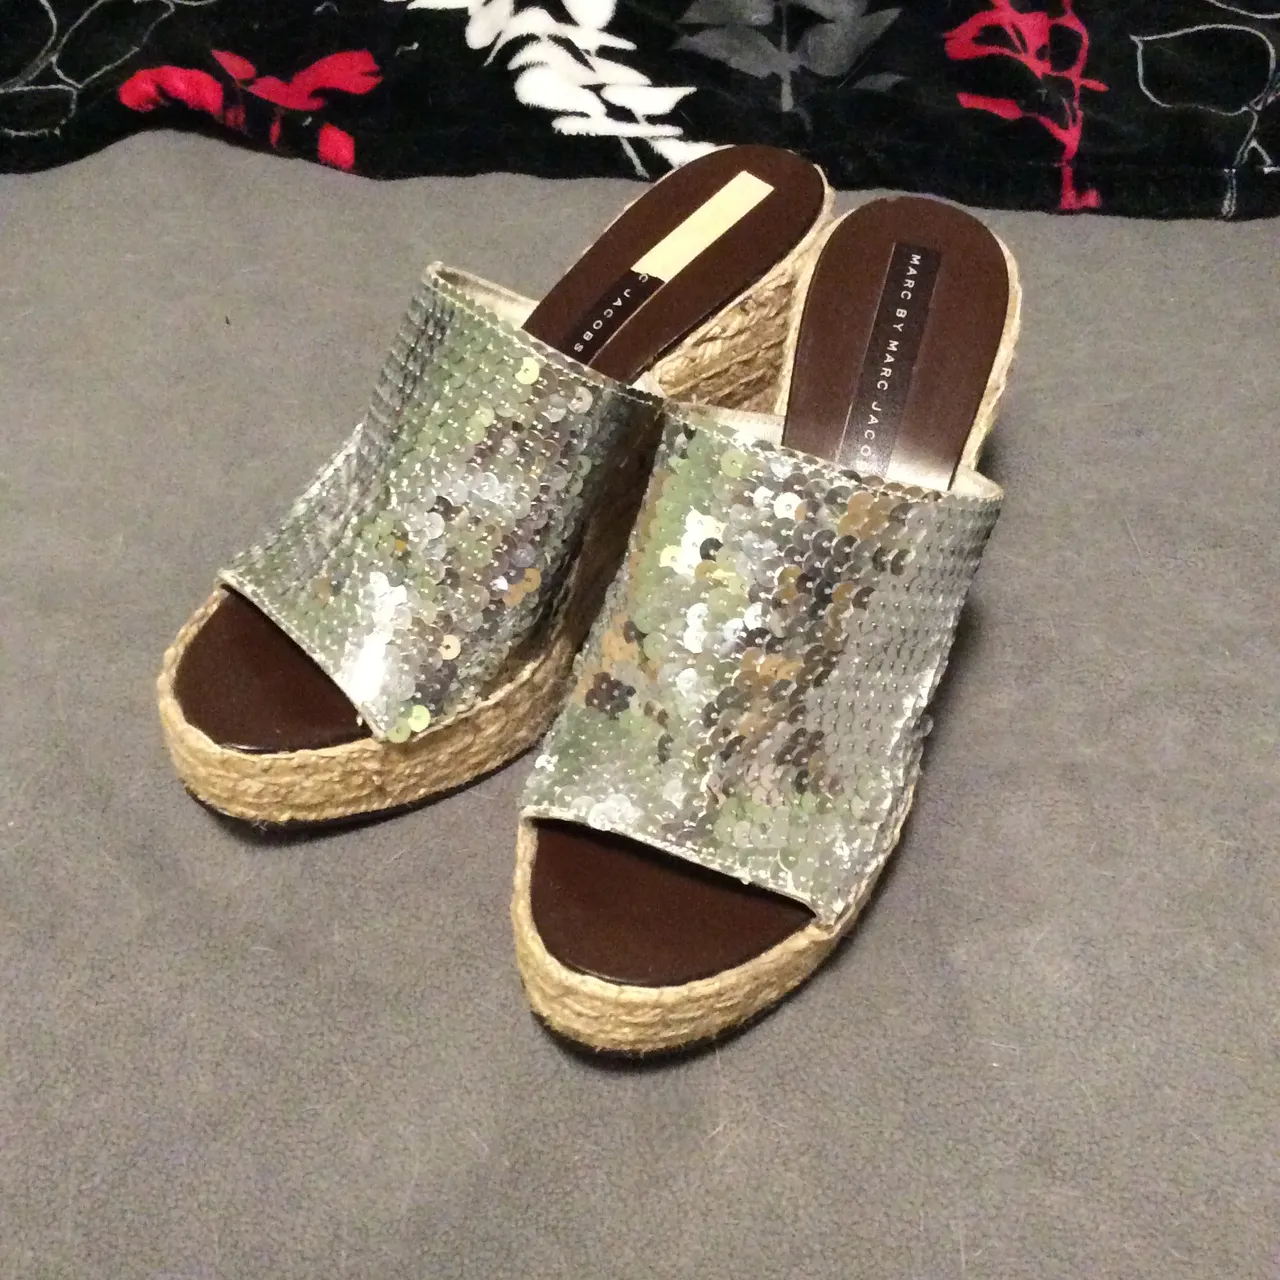 Marc Jacobs sparkling wedges photo 1